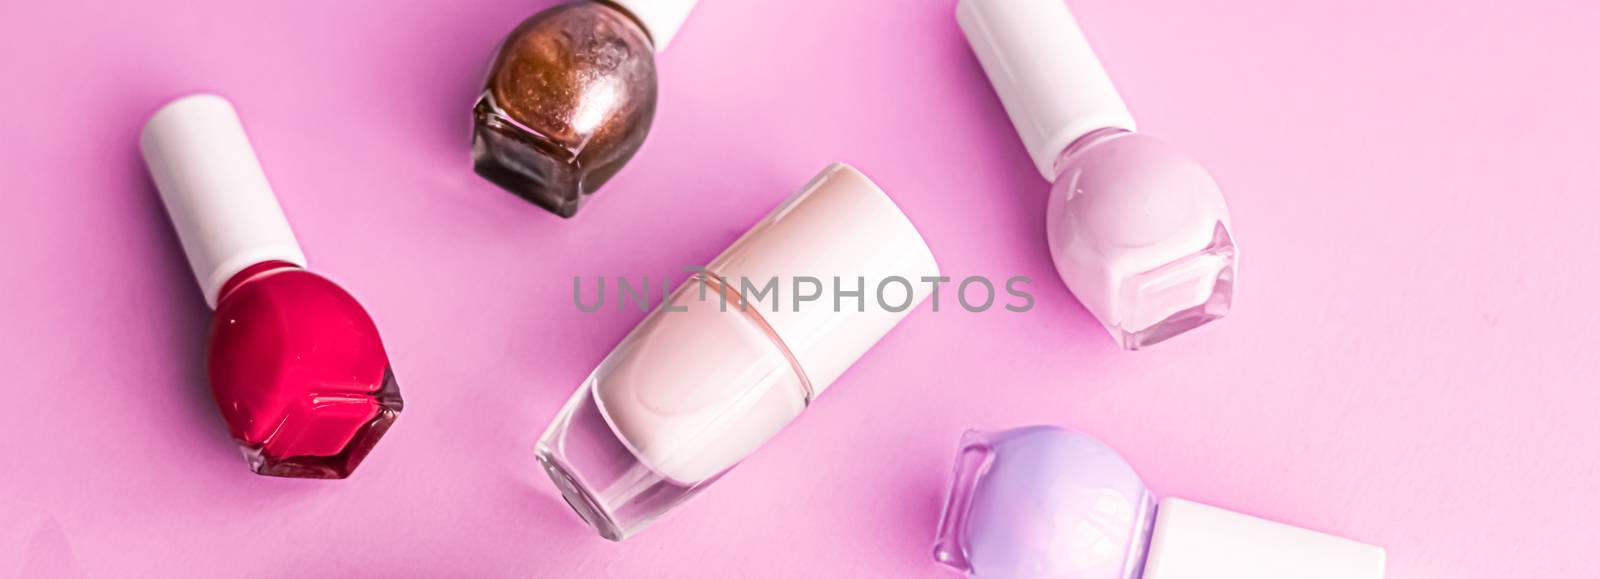 Nail polish bottles on pink background, beauty brand by Anneleven